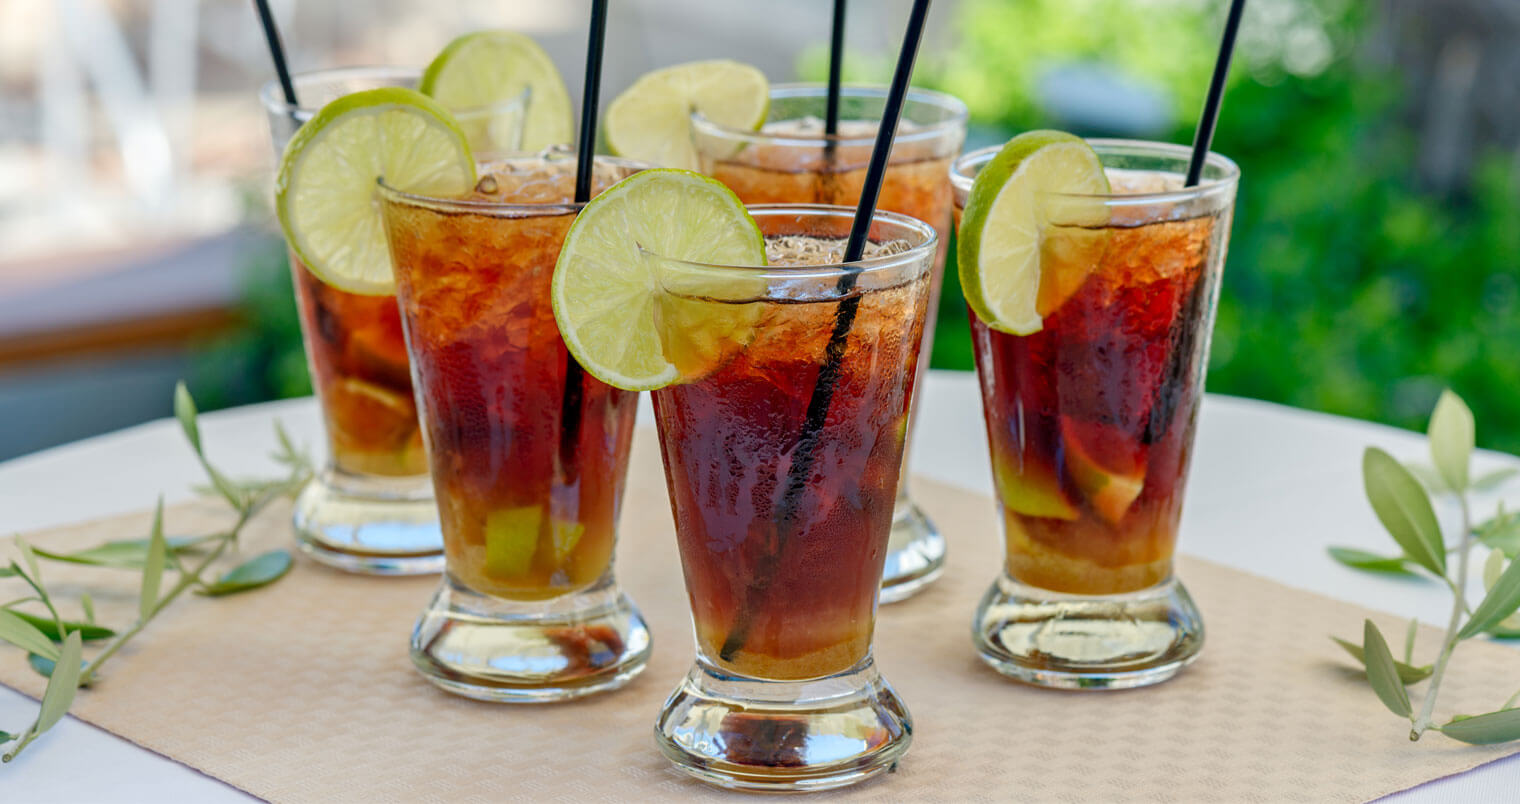 Bacardi Initiates a ‘No-Straw’ Movement to Reduce Waste, industry news, featured image